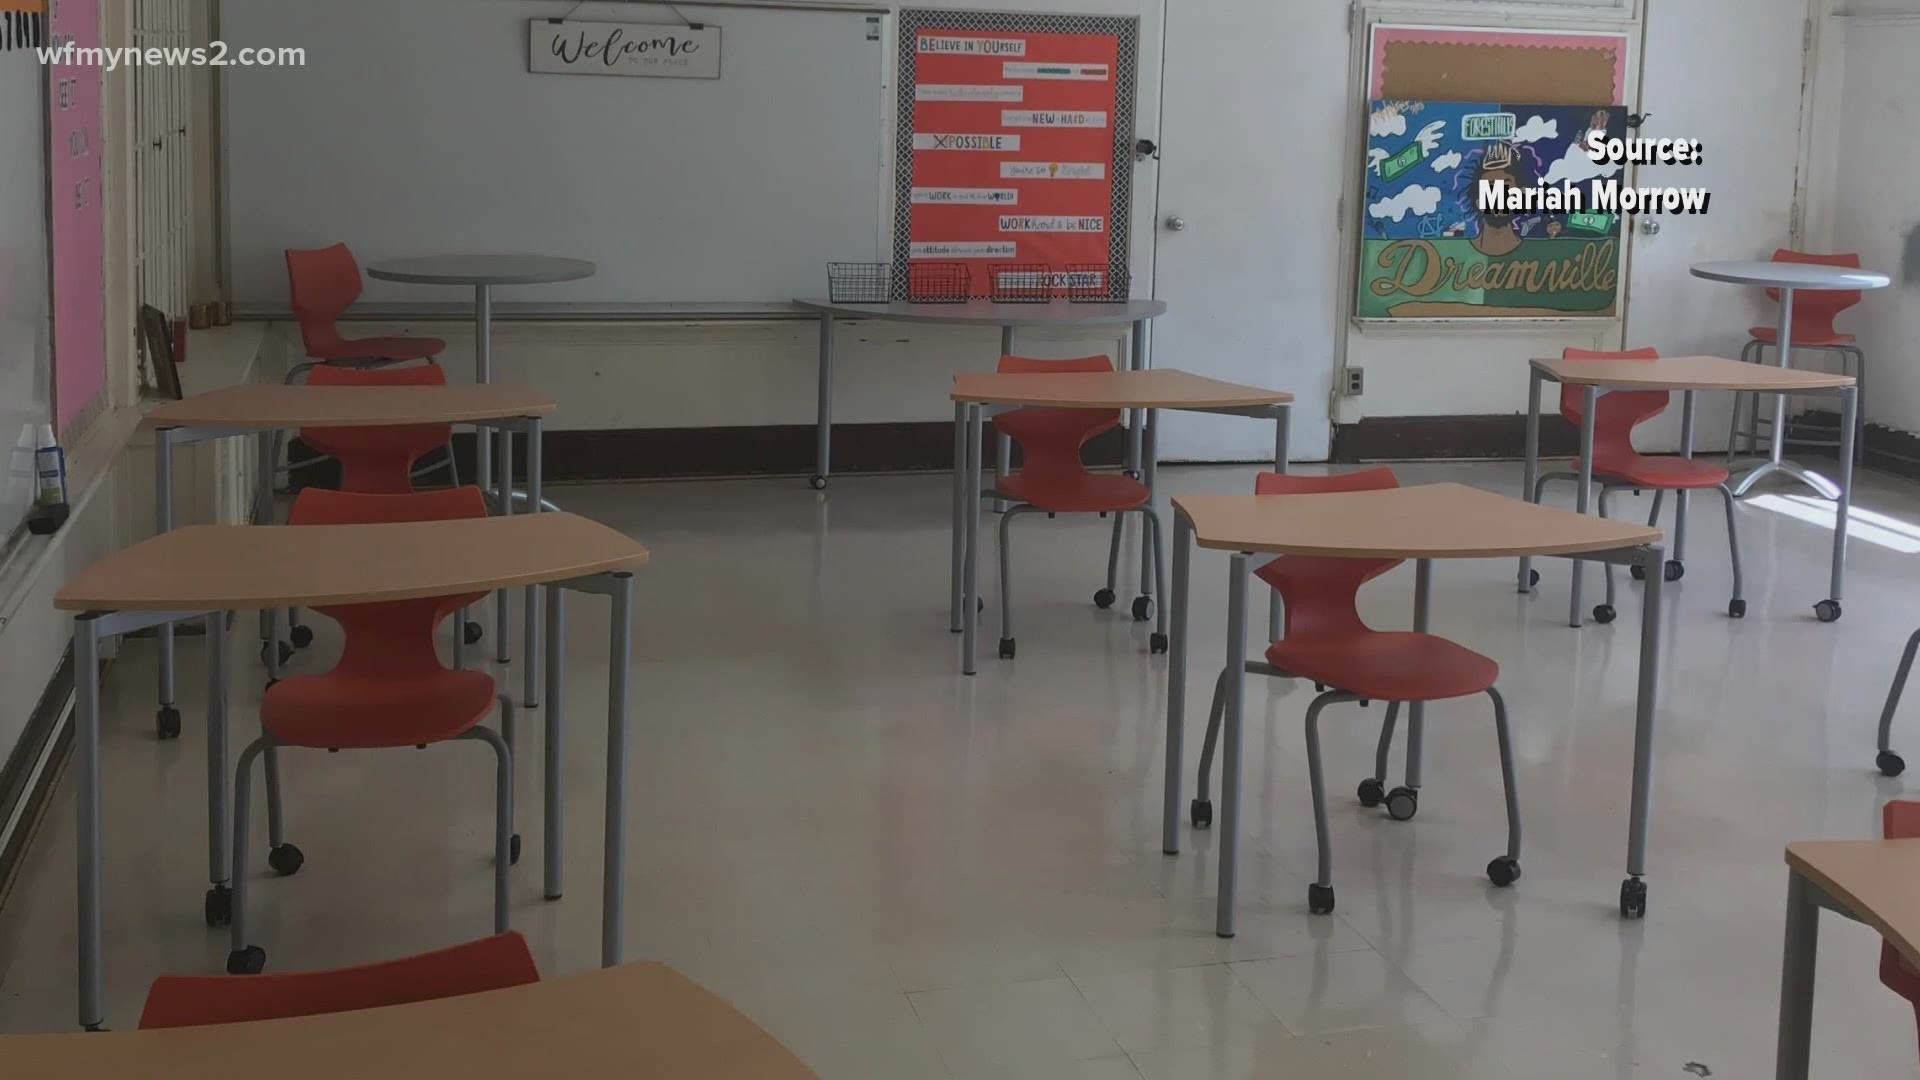 Guilford county teachers are adjusting to what re-entry means for them.